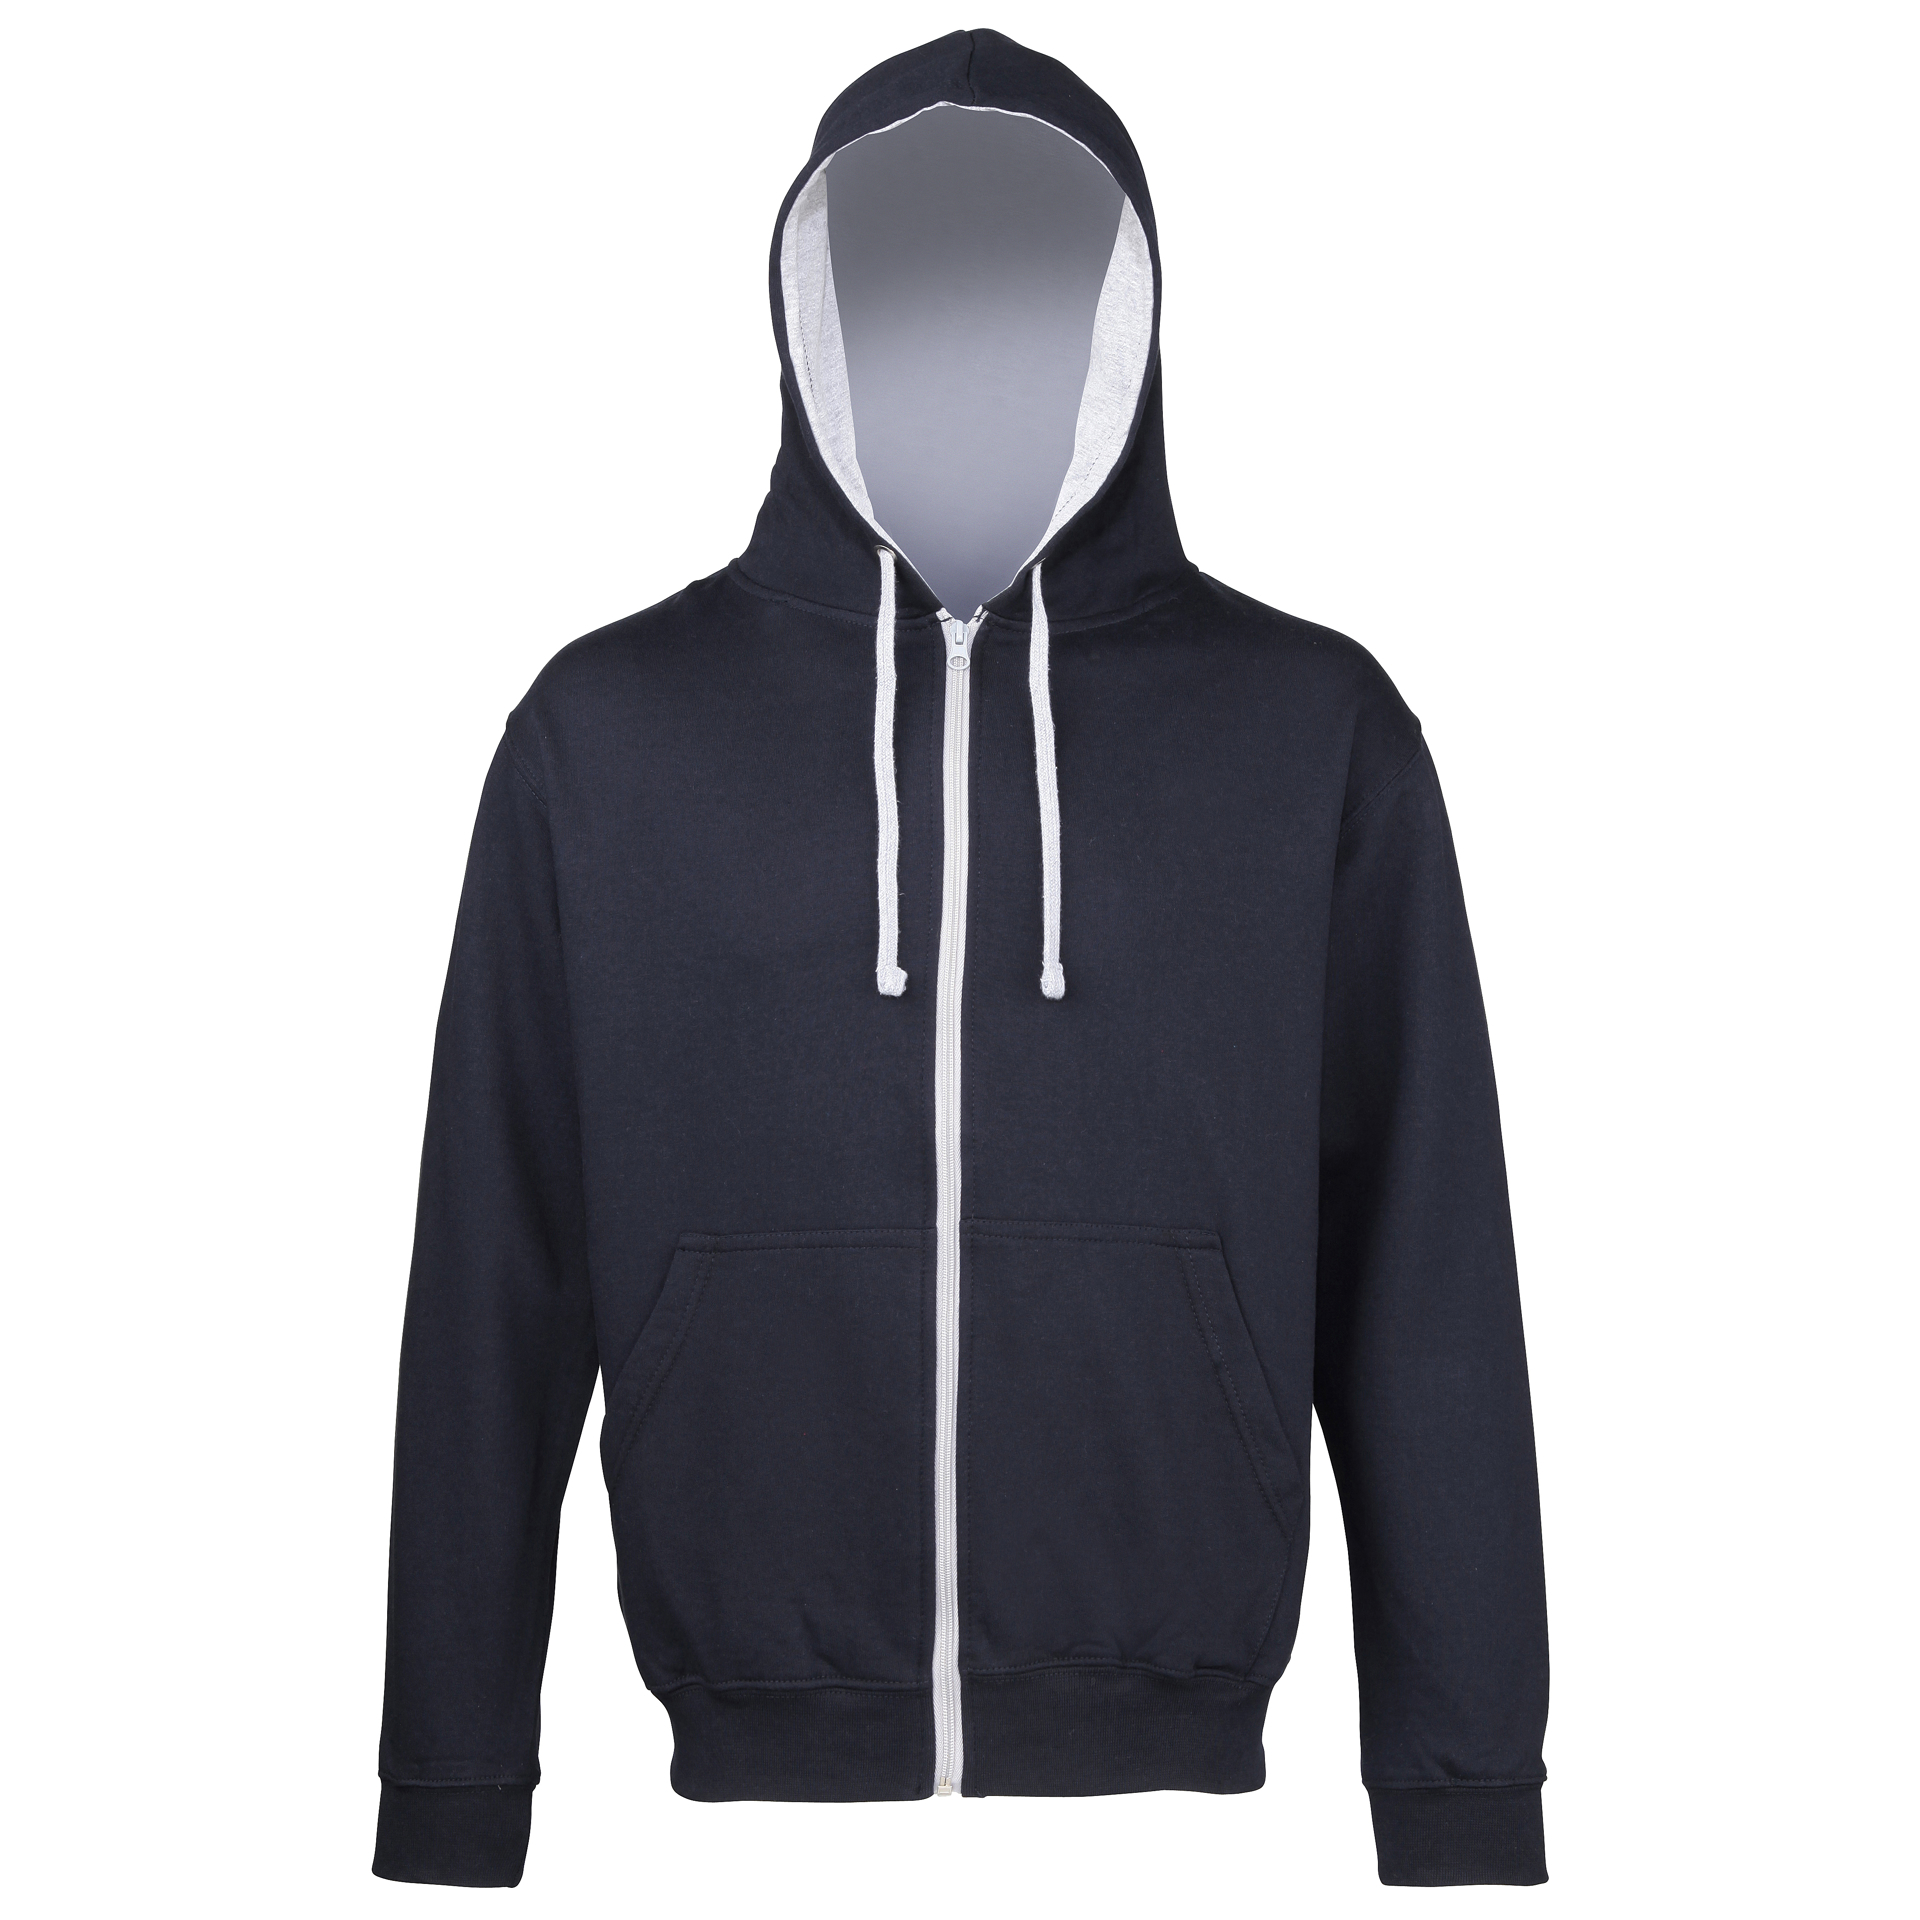 Men's Varsity Hoodie in navy with grey details and lining